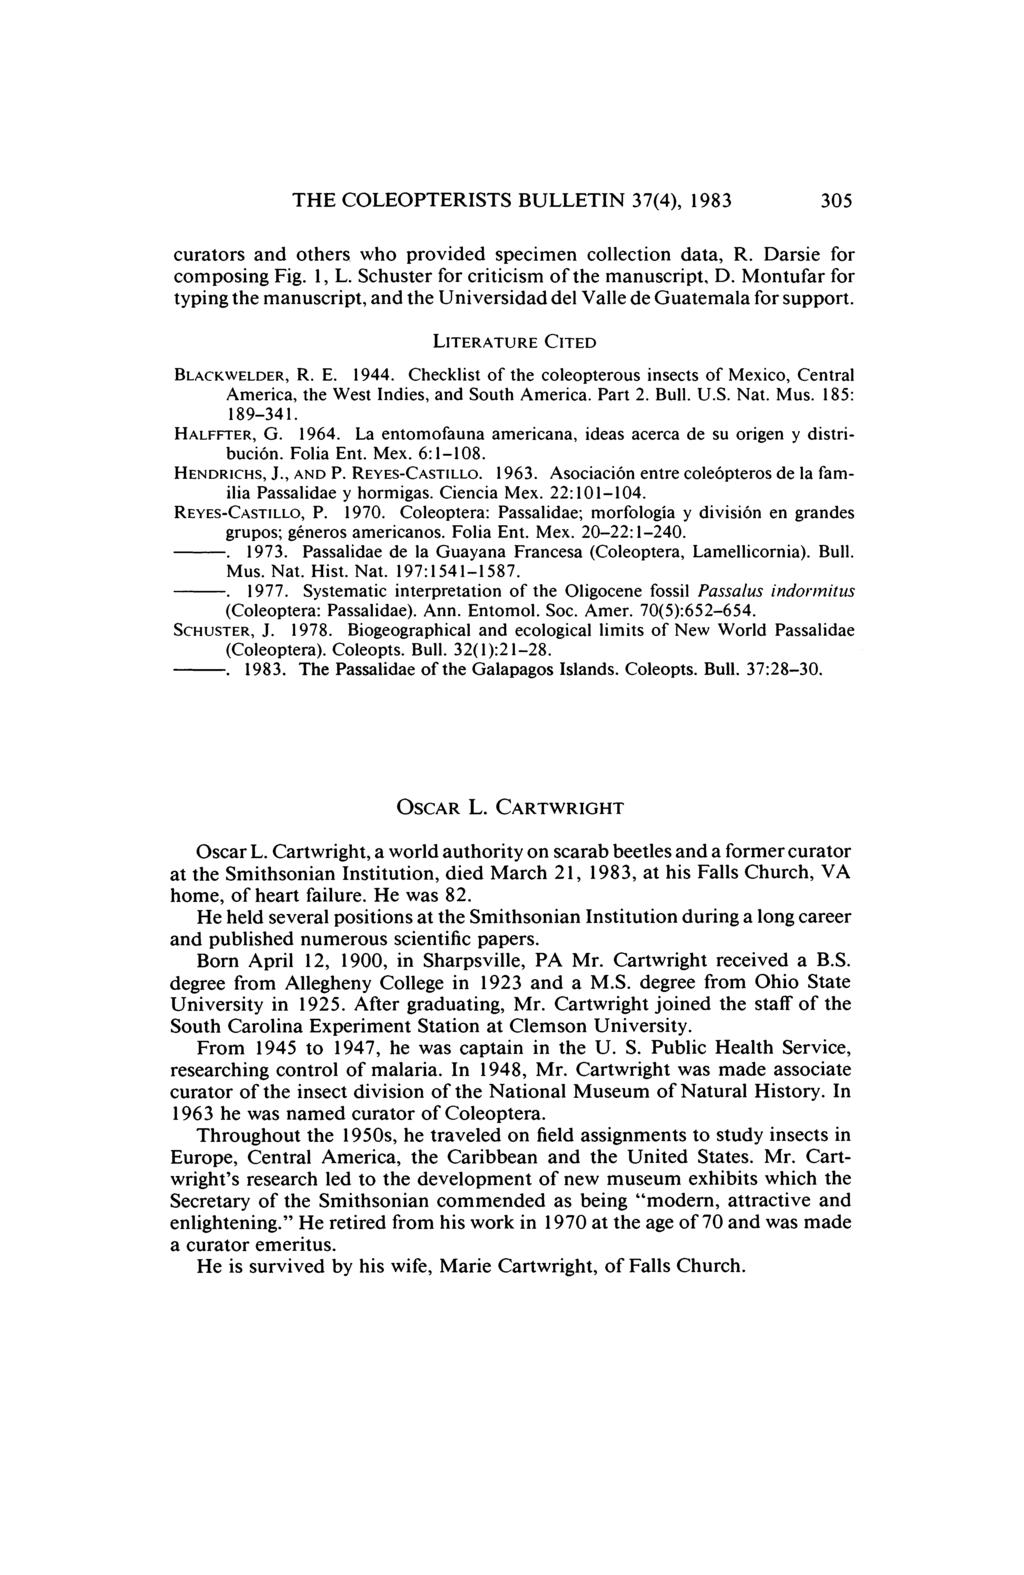 THE COLEOPTERISTS BULLETIN 37(4), 1983 305 curators and others who provided specimen collection data, R. Darsie for composing Fig. 1, L. Schuster for criticism of the manuscript, D.